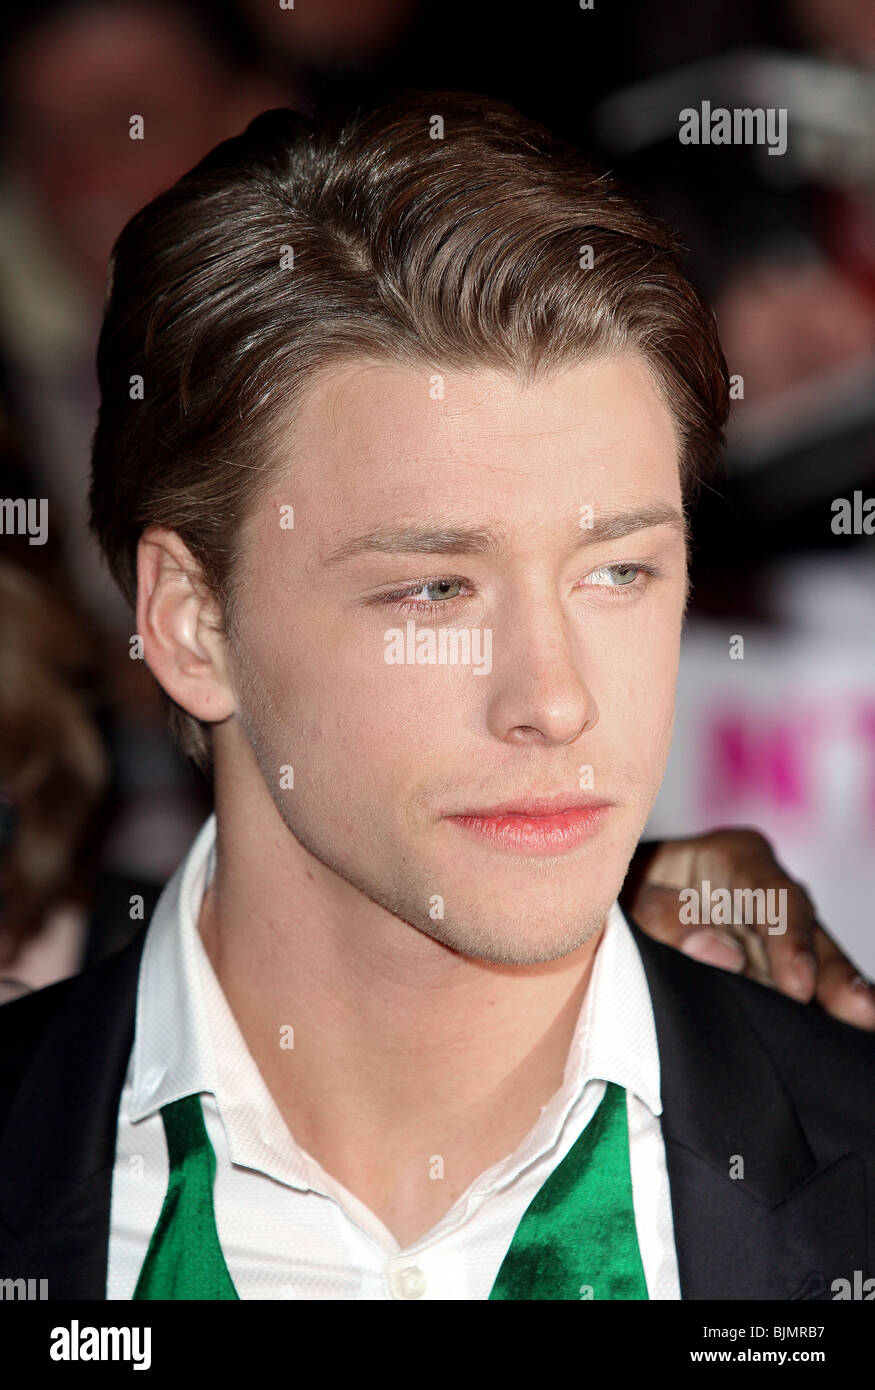 MITCH HEWER NATIONAL TELEVISION AWARDS 2008 THE ROYAL ALBERT HALL LONDON ENGLAND 29 October 2008 Stock Photo